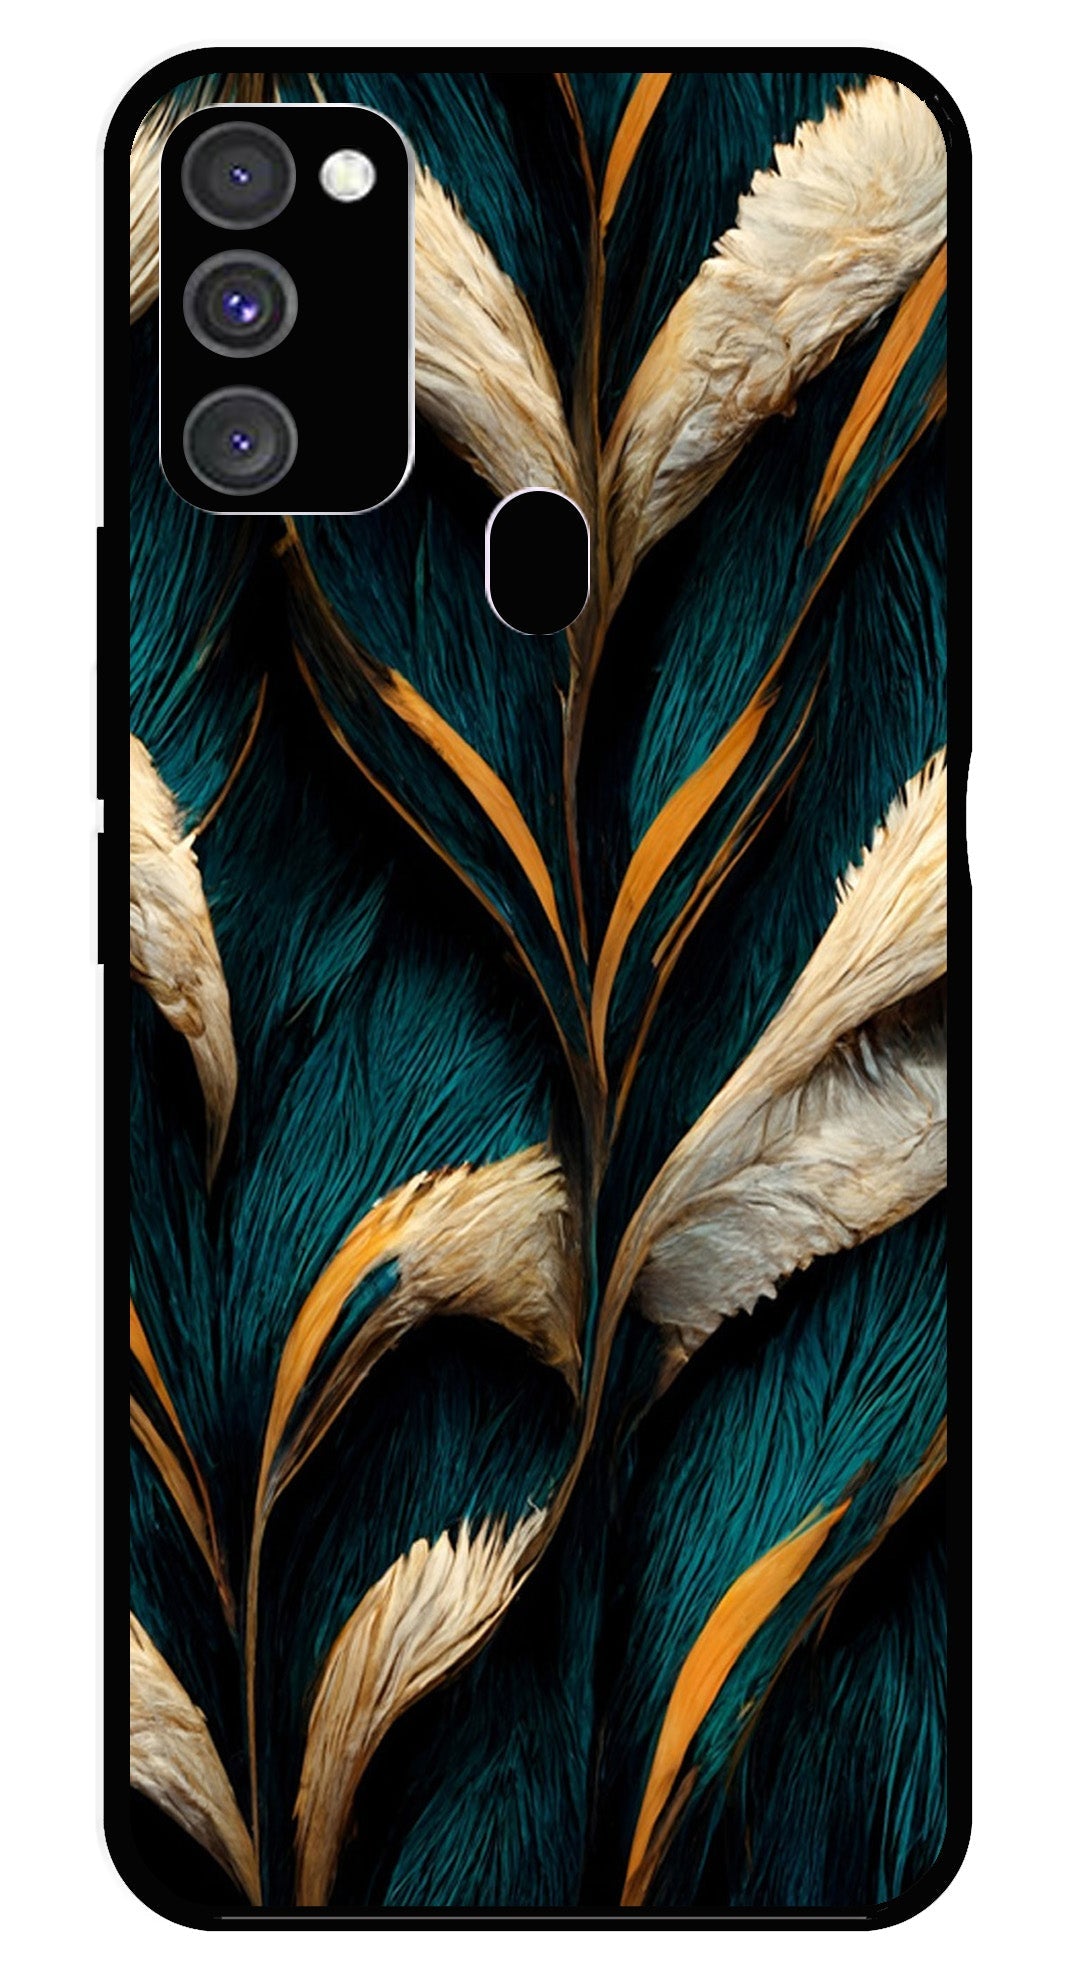 Feathers Metal Mobile Case for Samsung Galaxy M30s   (Design No -30)